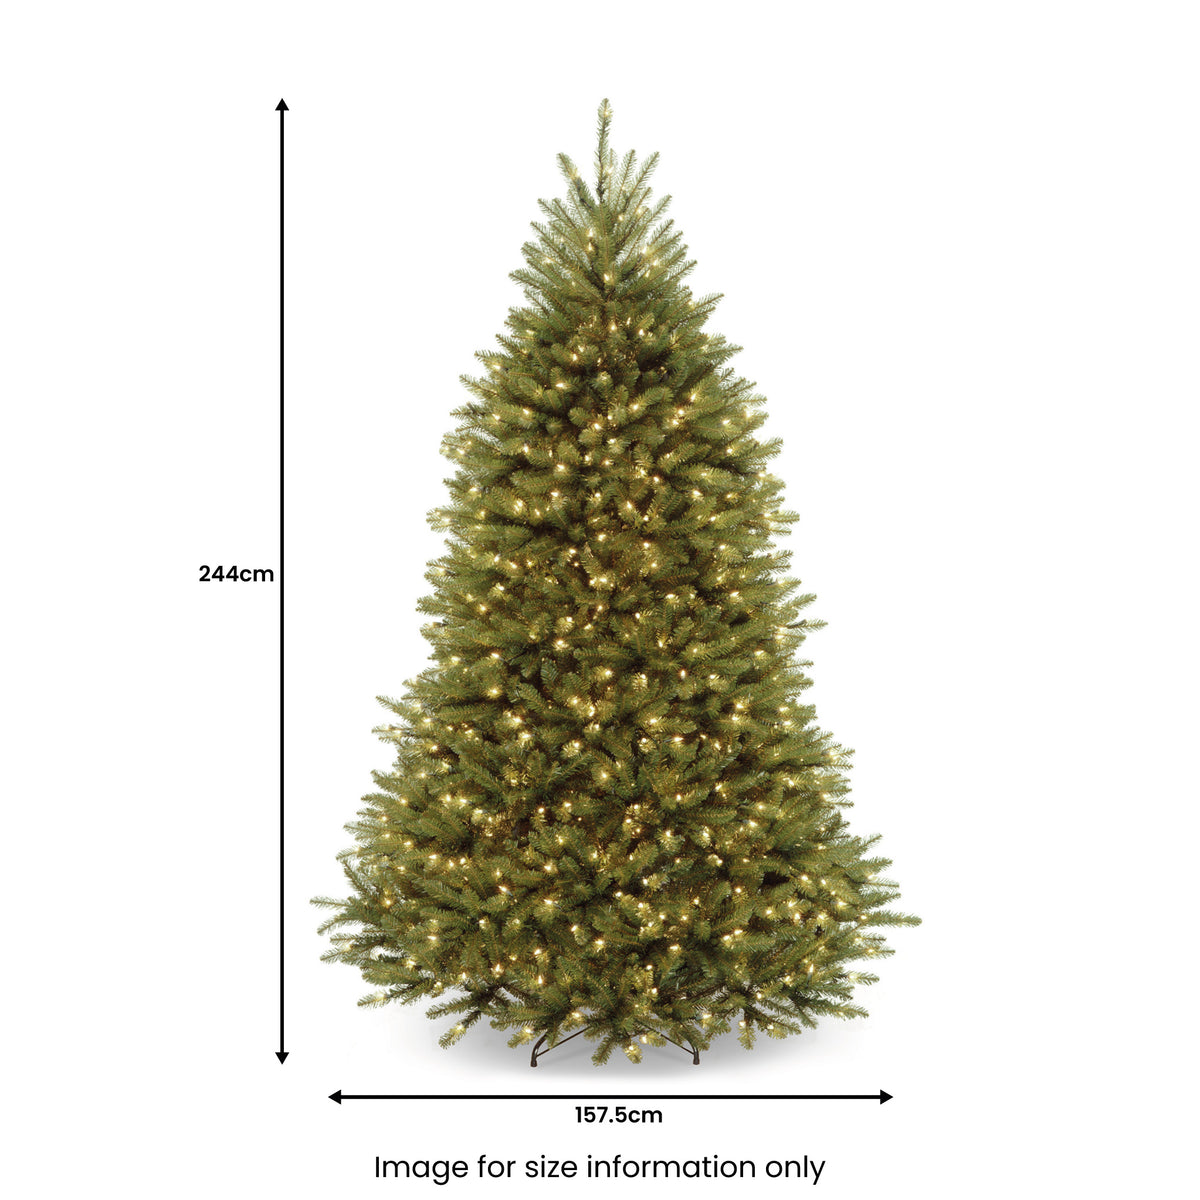 Dunhill Prelit Warm White LED Fir 8ft Tree dimensions